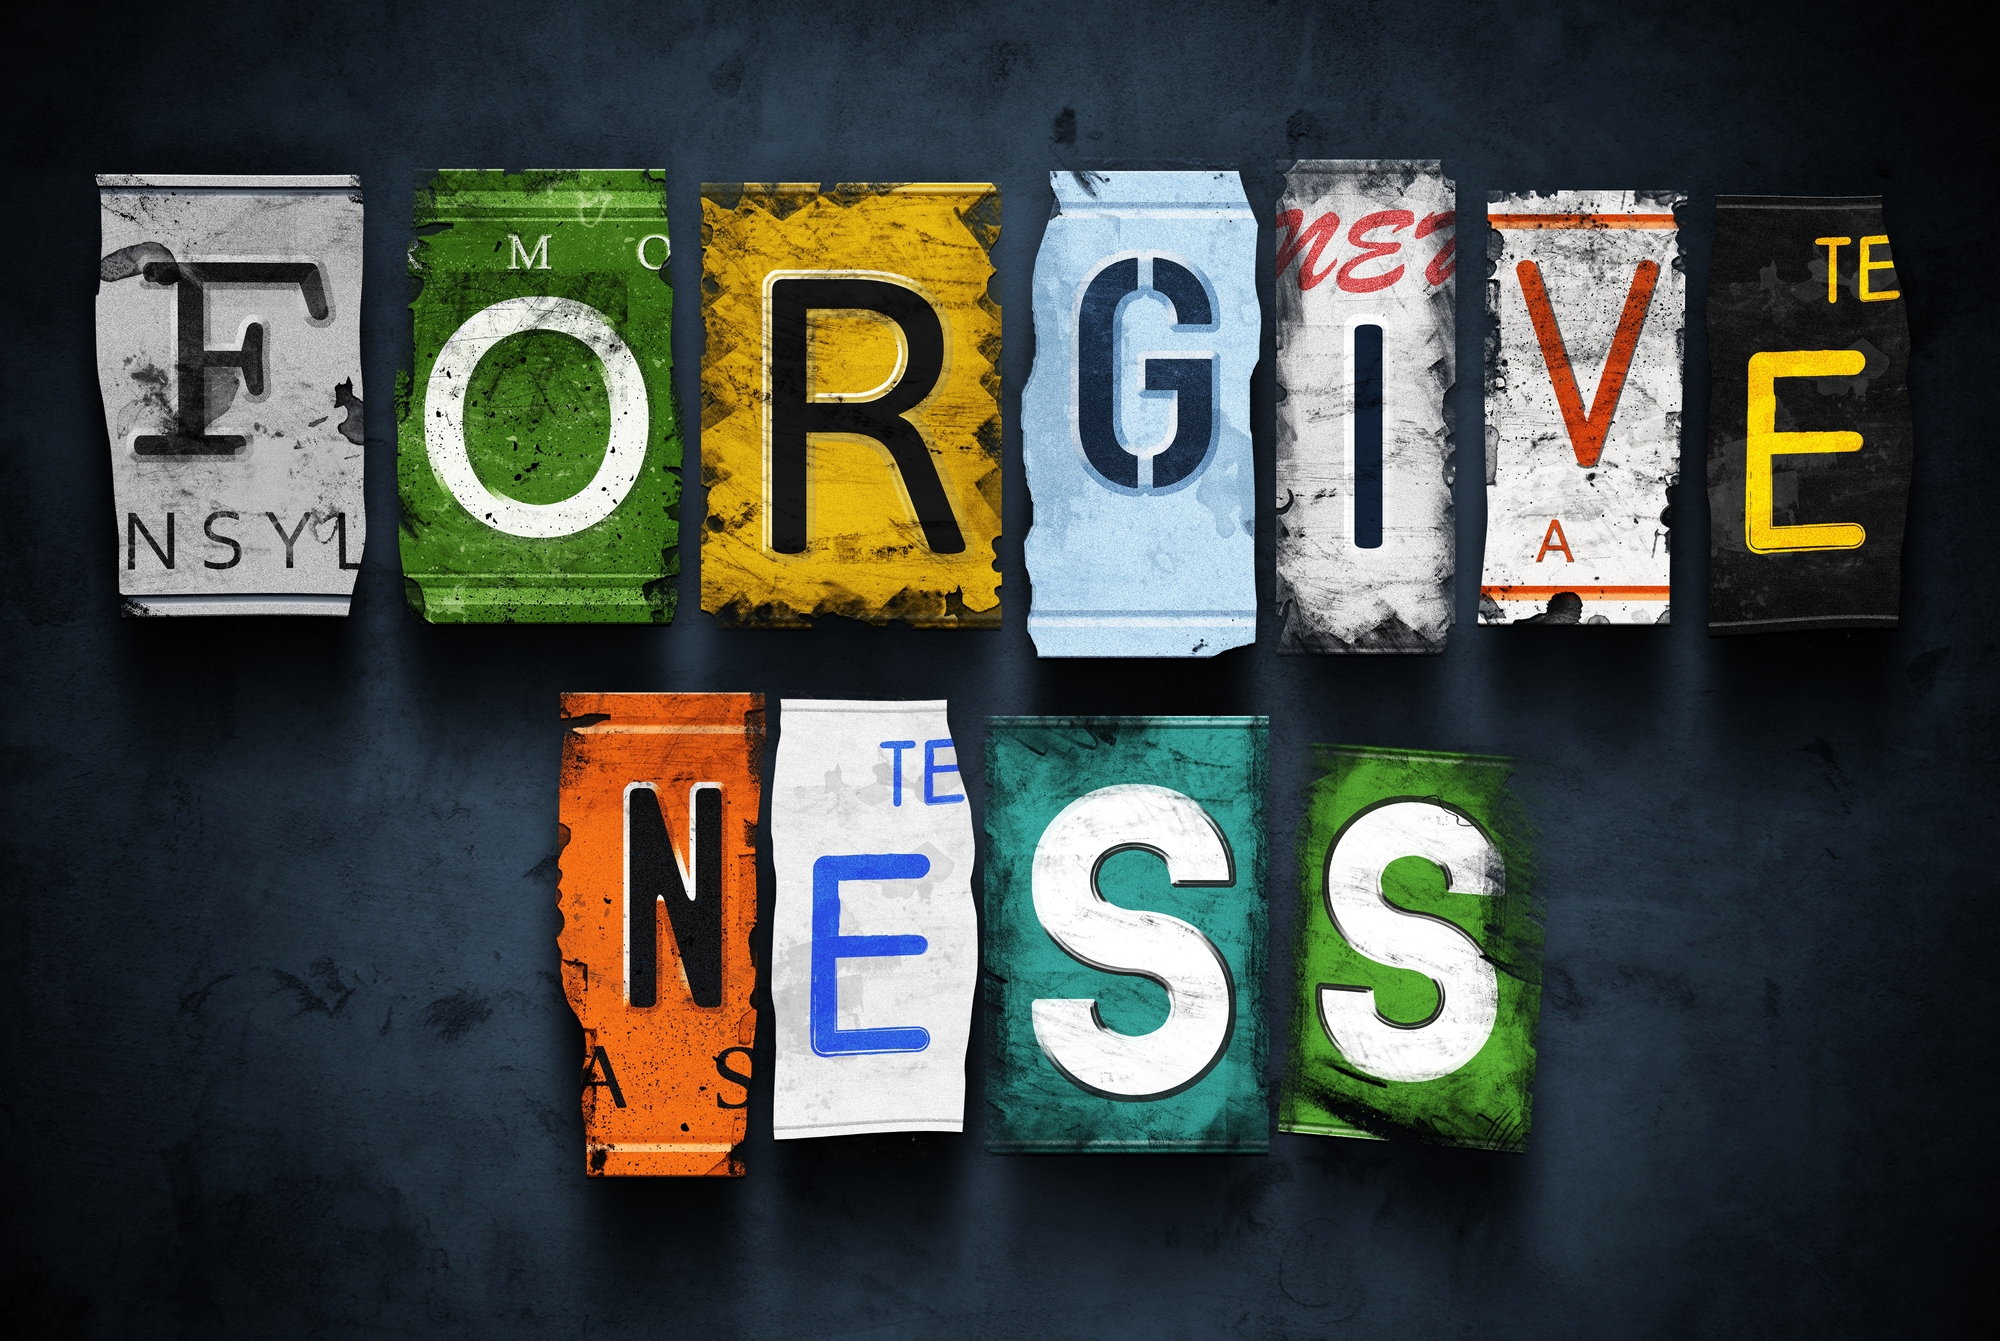 Day 5: The Connection Between Forgiveness & Depression